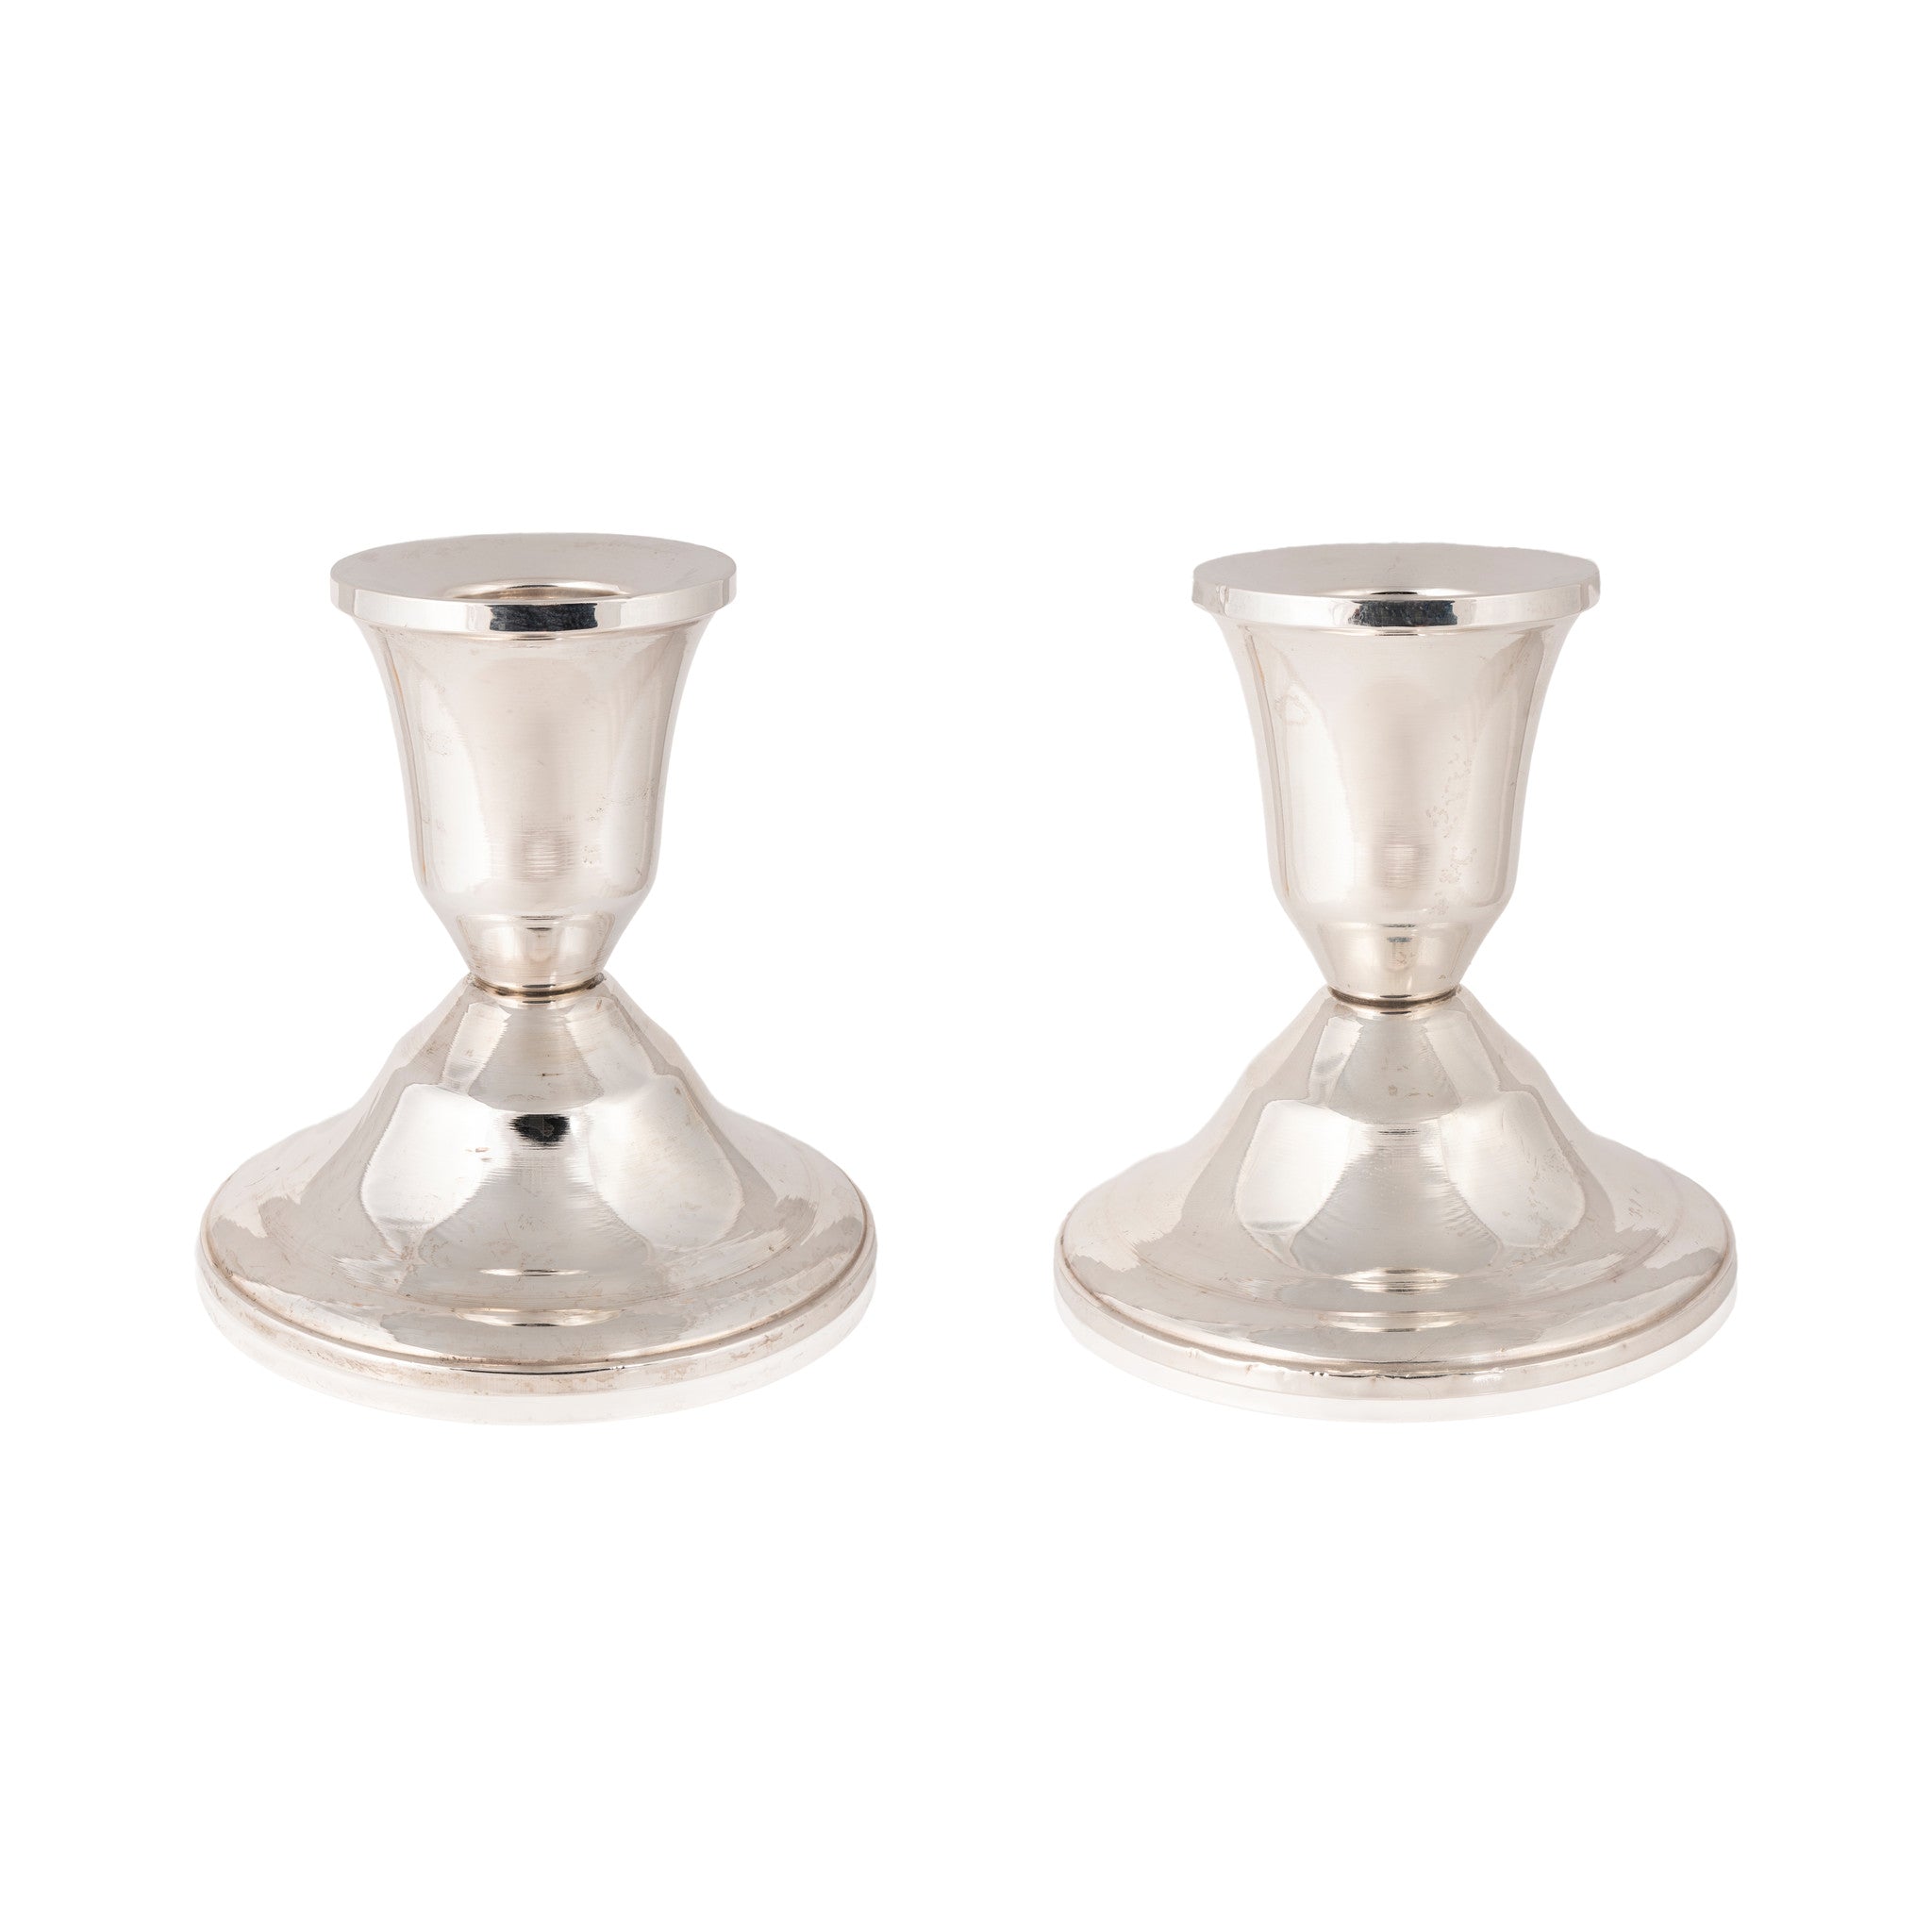 Pair Sterling Candlesticks, Furnishings, Decor, Candle Holder